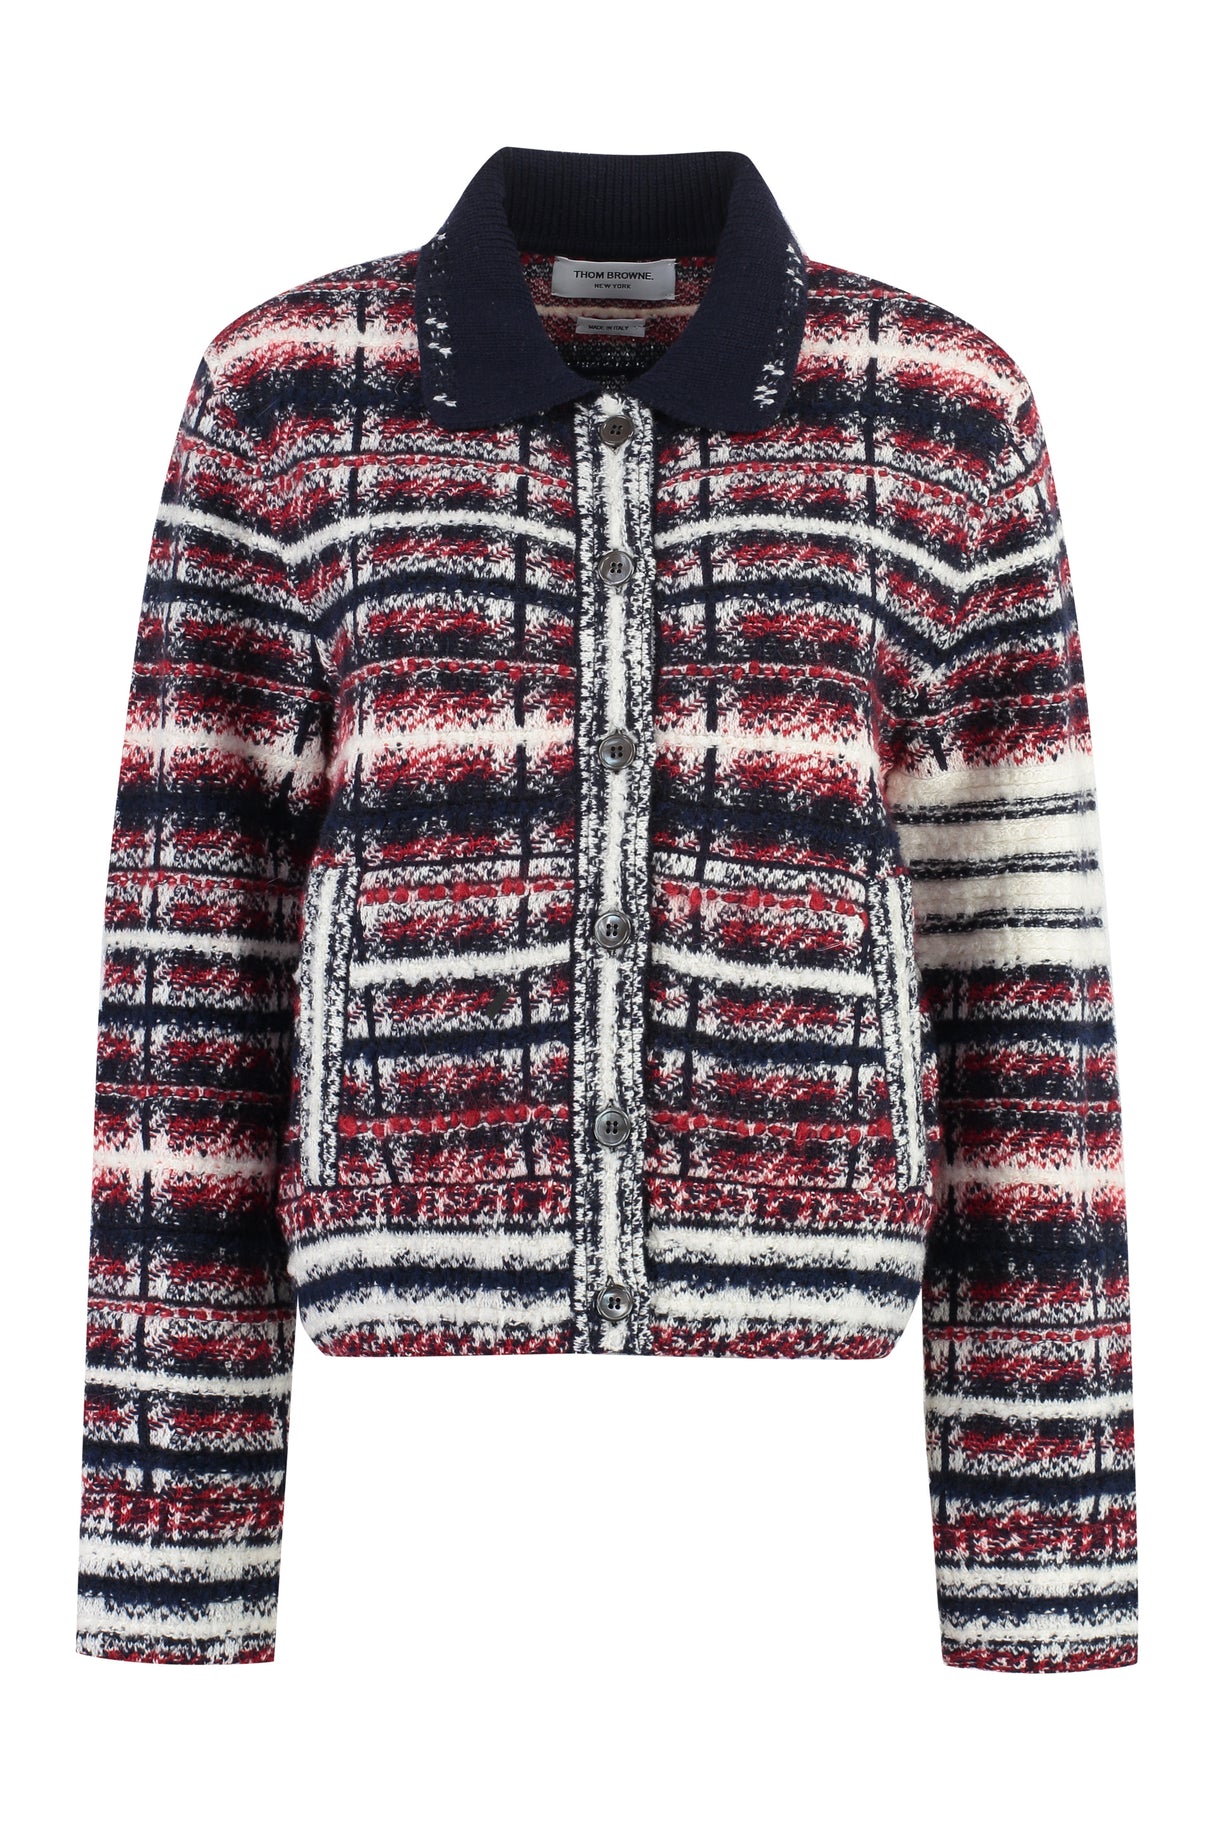 Autumn Charm Multicolor Checkered Knit Wood Jacket for Women